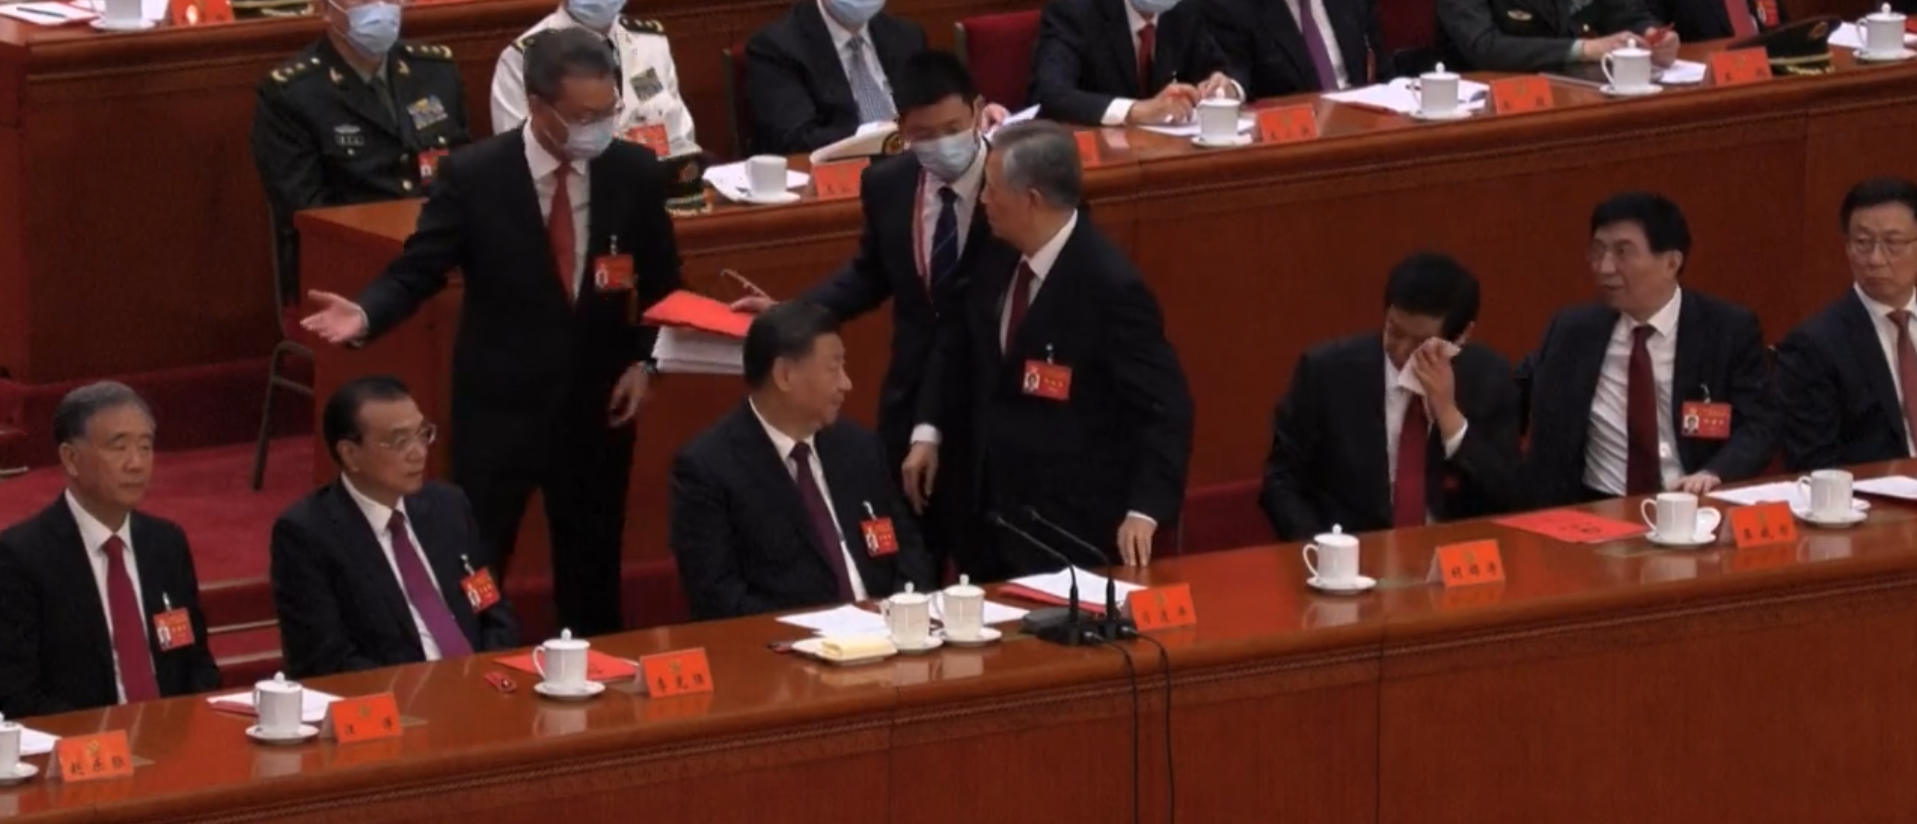 Li Zhanshu wipes sweat from his brow as Hu Jintao is removed from the final session of the 20th National Congress of the Chinese Communist Party on Oct. 22, 2022. (Screenshot/BBCNews)